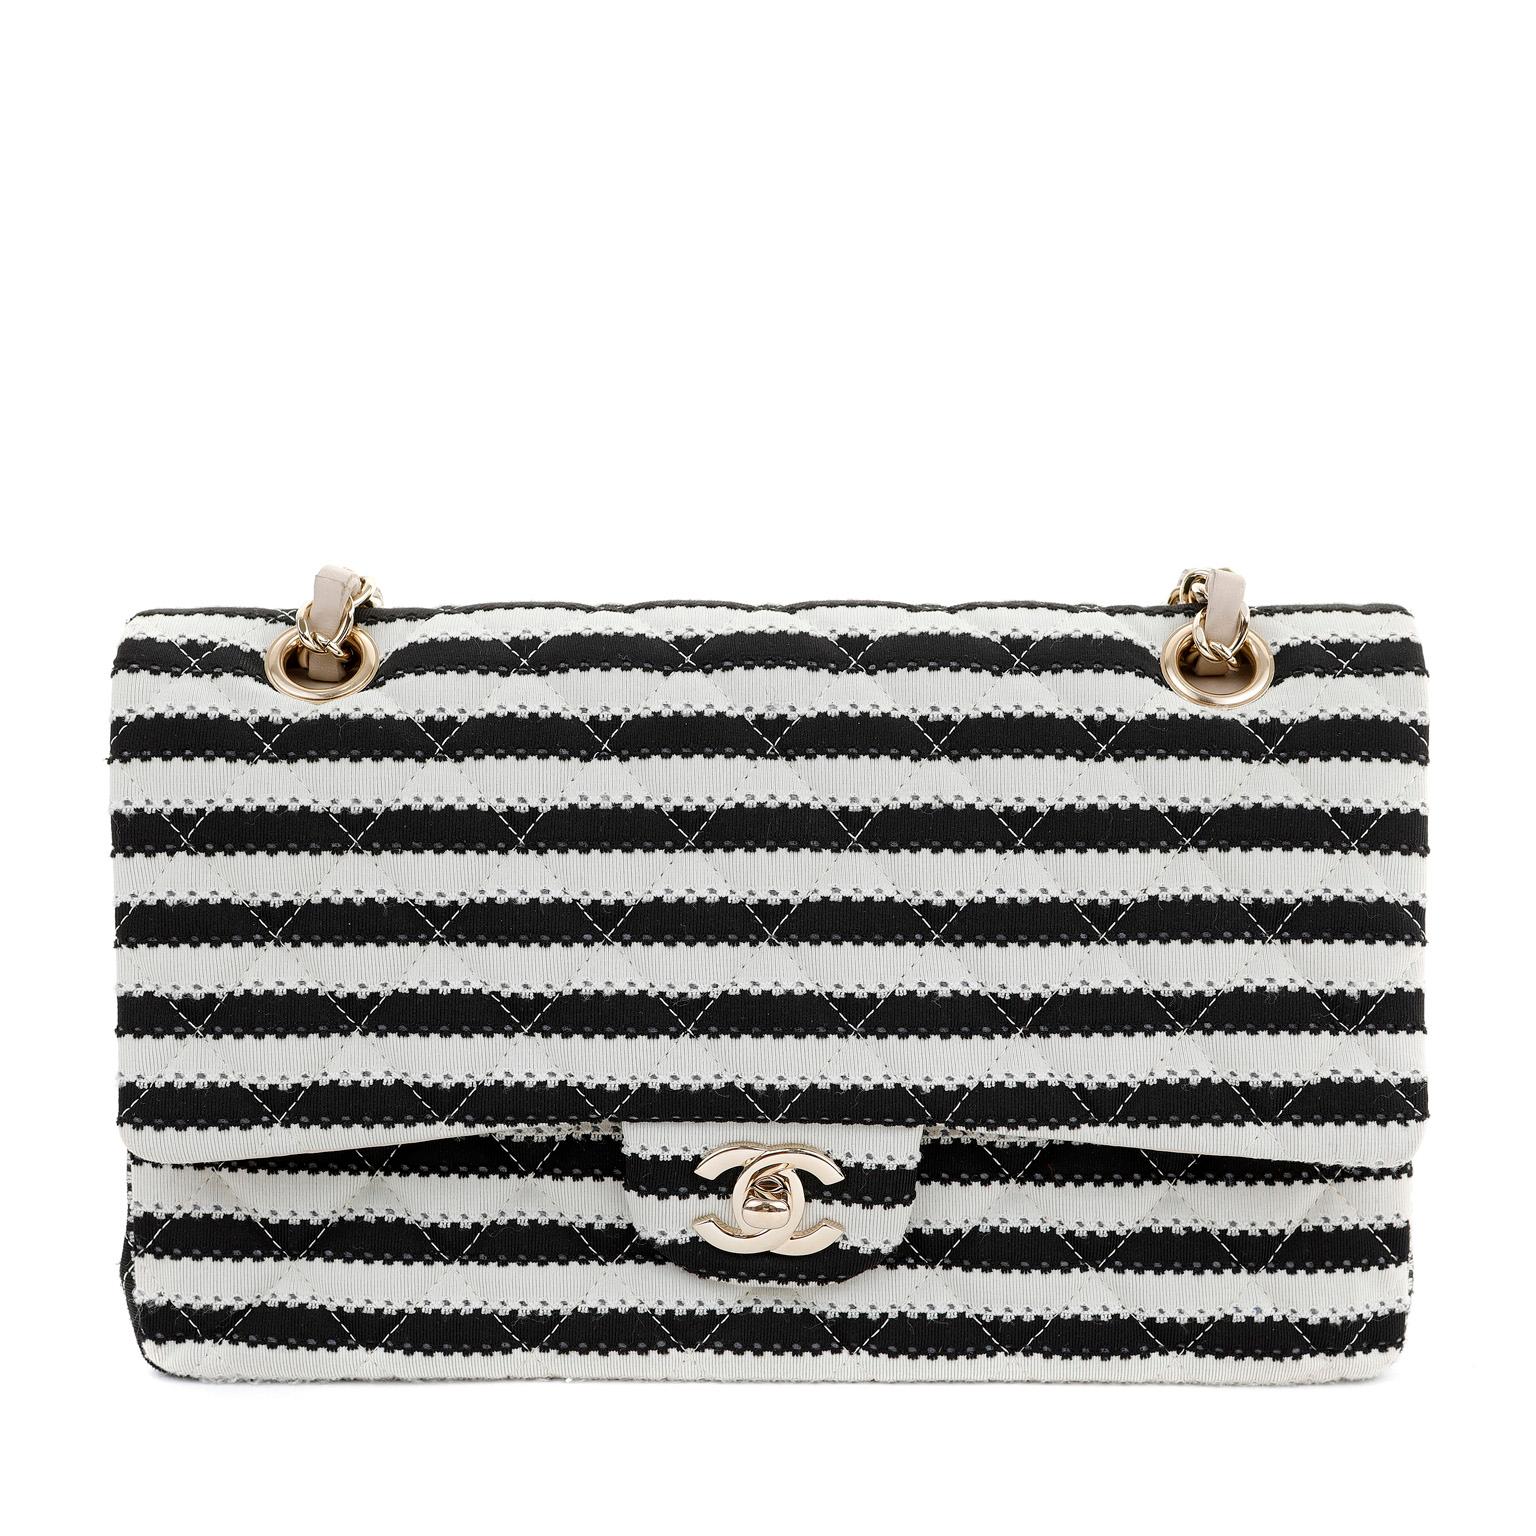 This authentic Chanel Black and White Striped Medium Classic Flap is in very good condition.  Graphic stripes combined with pearl accents makes this a spectacular piece for any collection.

Black and white striped fabric is quilted in signature